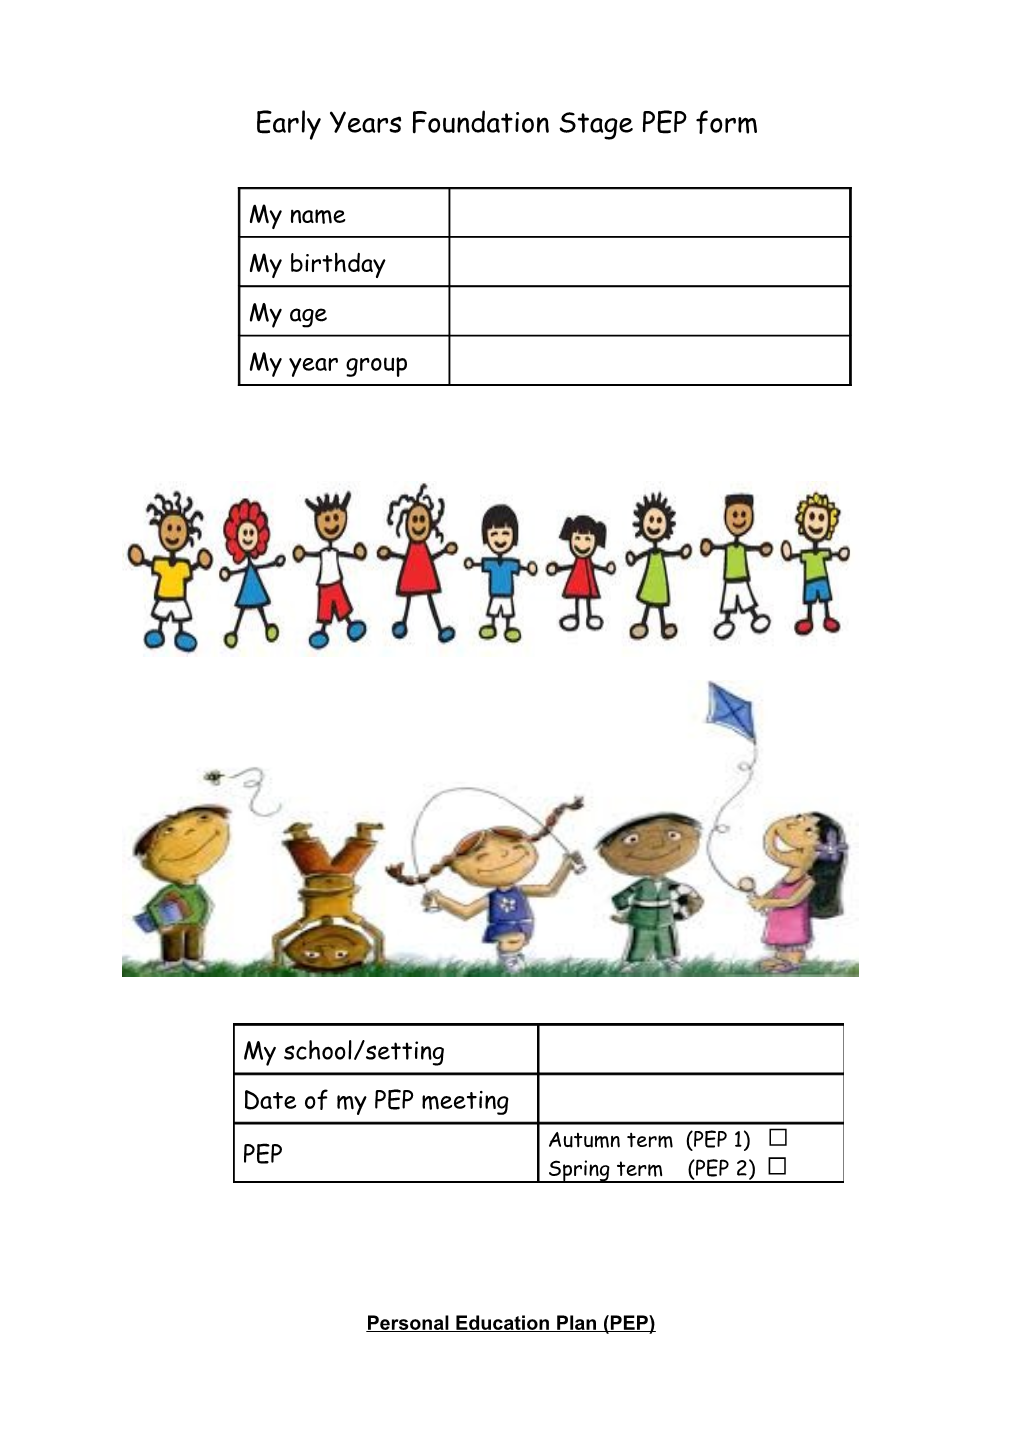 Early Years Foundation Stage PEP Form No